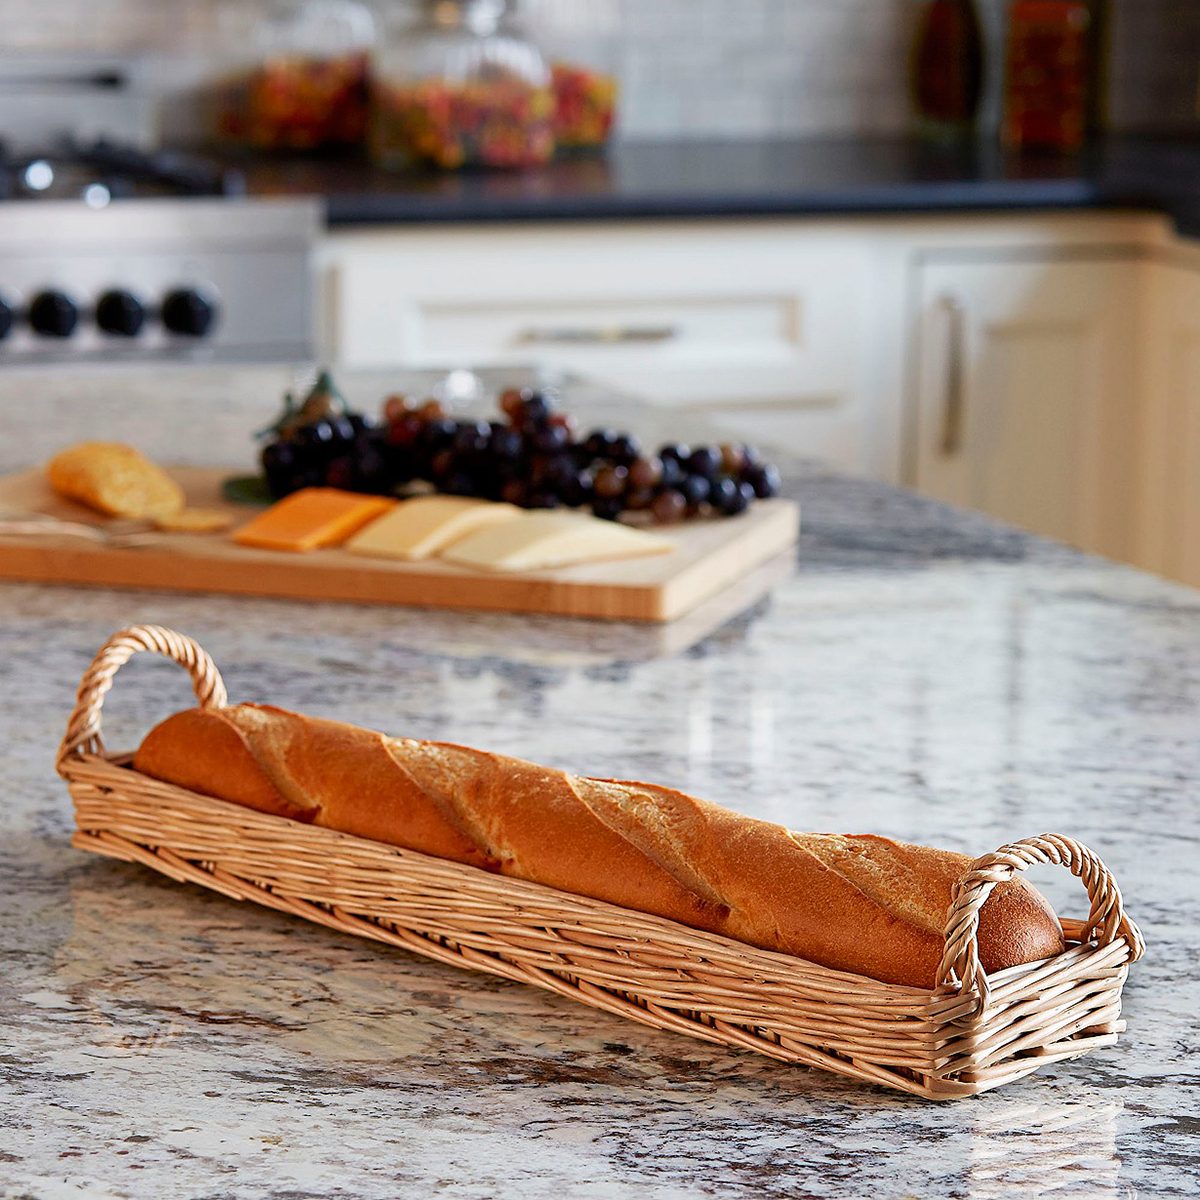 MagiDealMagiDeal Round Woven Bread Roll Baskets Snacks Food Serving Baskets L 